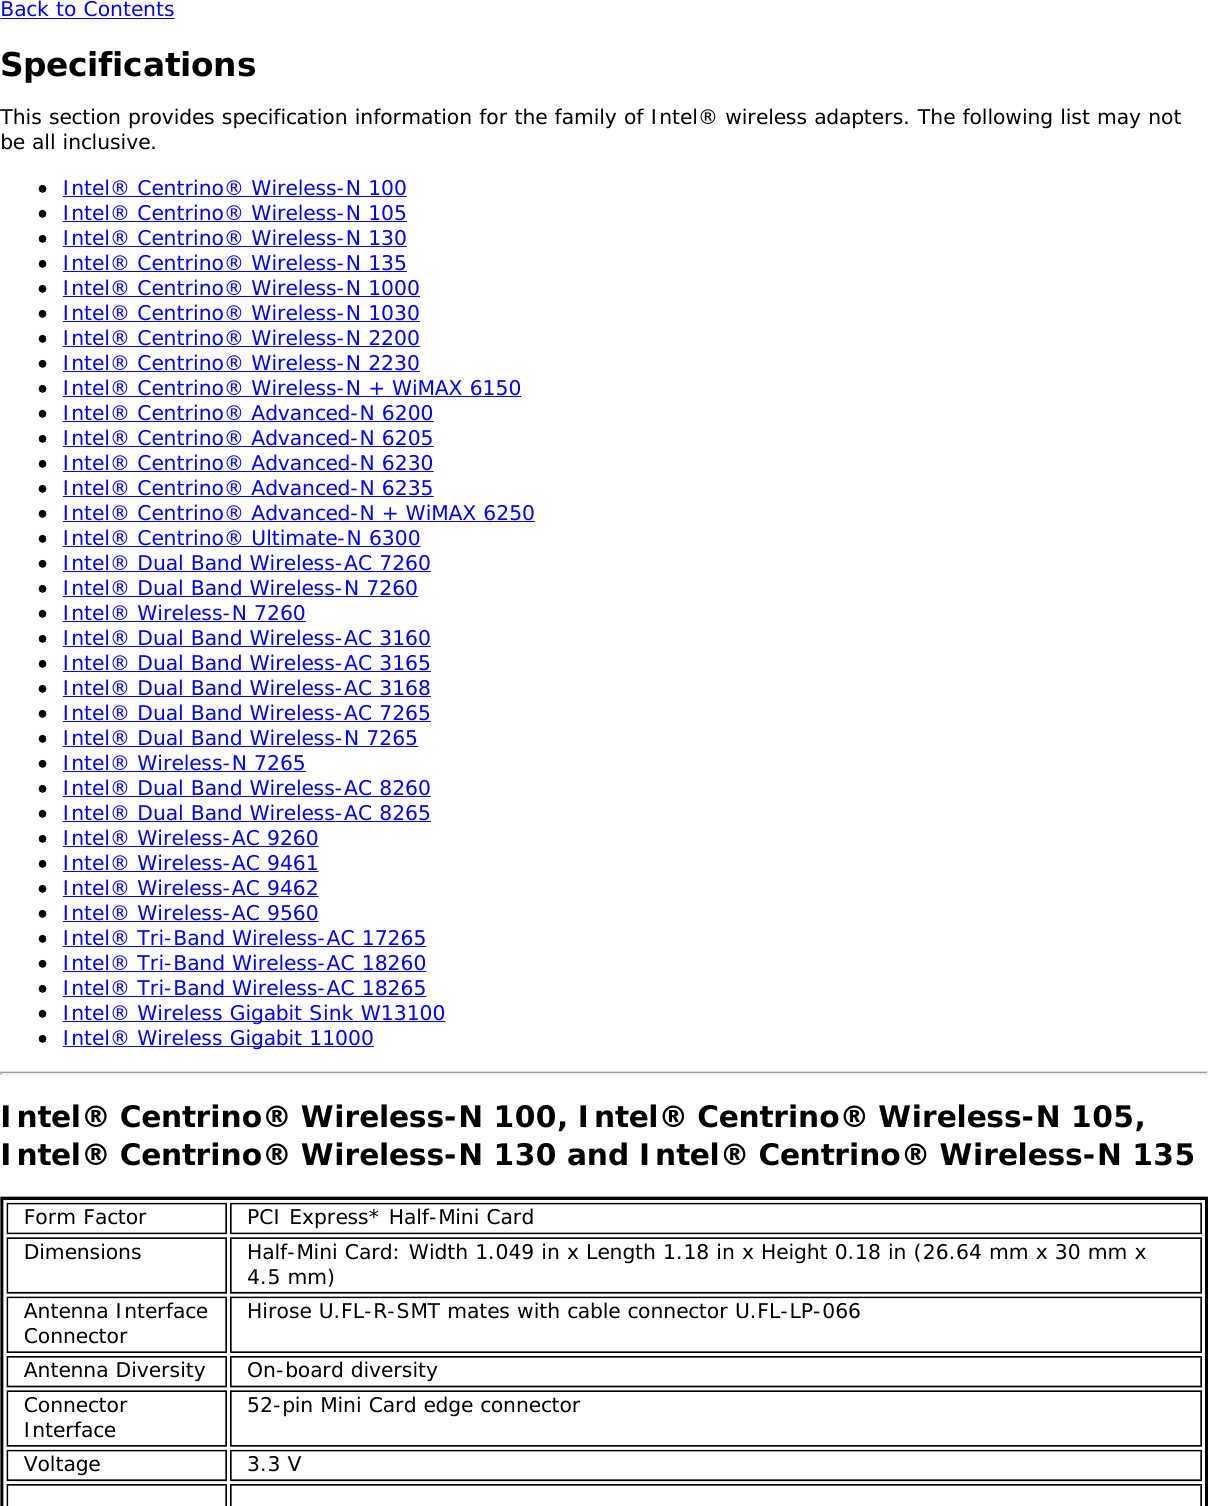 Back to ContentsSpecificationsThis section provides specification information for the family of Intel® wireless adapters. The following list may notbe all inclusive.Intel® Centrino® Wireless-N 100Intel® Centrino® Wireless-N 105Intel® Centrino® Wireless-N 130Intel® Centrino® Wireless-N 135Intel® Centrino® Wireless-N 1000Intel® Centrino® Wireless-N 1030Intel® Centrino® Wireless-N 2200Intel® Centrino® Wireless-N 2230Intel® Centrino® Wireless-N + WiMAX 6150Intel® Centrino® Advanced-N 6200Intel® Centrino® Advanced-N 6205Intel® Centrino® Advanced-N 6230Intel® Centrino® Advanced-N 6235Intel® Centrino® Advanced-N + WiMAX 6250Intel® Centrino® Ultimate-N 6300Intel® Dual Band Wireless-AC 7260Intel® Dual Band Wireless-N 7260Intel® Wireless-N 7260Intel® Dual Band Wireless-AC 3160Intel® Dual Band Wireless-AC 3165Intel® Dual Band Wireless-AC 3168Intel® Dual Band Wireless-AC 7265Intel® Dual Band Wireless-N 7265Intel® Wireless-N 7265Intel® Dual Band Wireless-AC 8260Intel® Dual Band Wireless-AC 8265Intel® Wireless-AC 9260Intel® Wireless-AC 9461Intel® Wireless-AC 9462Intel® Wireless-AC 9560Intel® Tri-Band Wireless-AC 17265Intel® Tri-Band Wireless-AC 18260Intel® Tri-Band Wireless-AC 18265Intel® Wireless Gigabit Sink W13100Intel® Wireless Gigabit 11000Intel® Centrino® Wireless-N 100, Intel® Centrino® Wireless-N 105,Intel® Centrino® Wireless-N 130 and Intel® Centrino® Wireless-N 135Form Factor PCI Express* Half-Mini CardDimensions Half-Mini Card: Width 1.049 in x Length 1.18 in x Height 0.18 in (26.64 mm x 30 mm x4.5 mm)Antenna InterfaceConnector Hirose U.FL-R-SMT mates with cable connector U.FL-LP-066Antenna Diversity On-board diversityConnectorInterface 52-pin Mini Card edge connectorVoltage 3.3 V